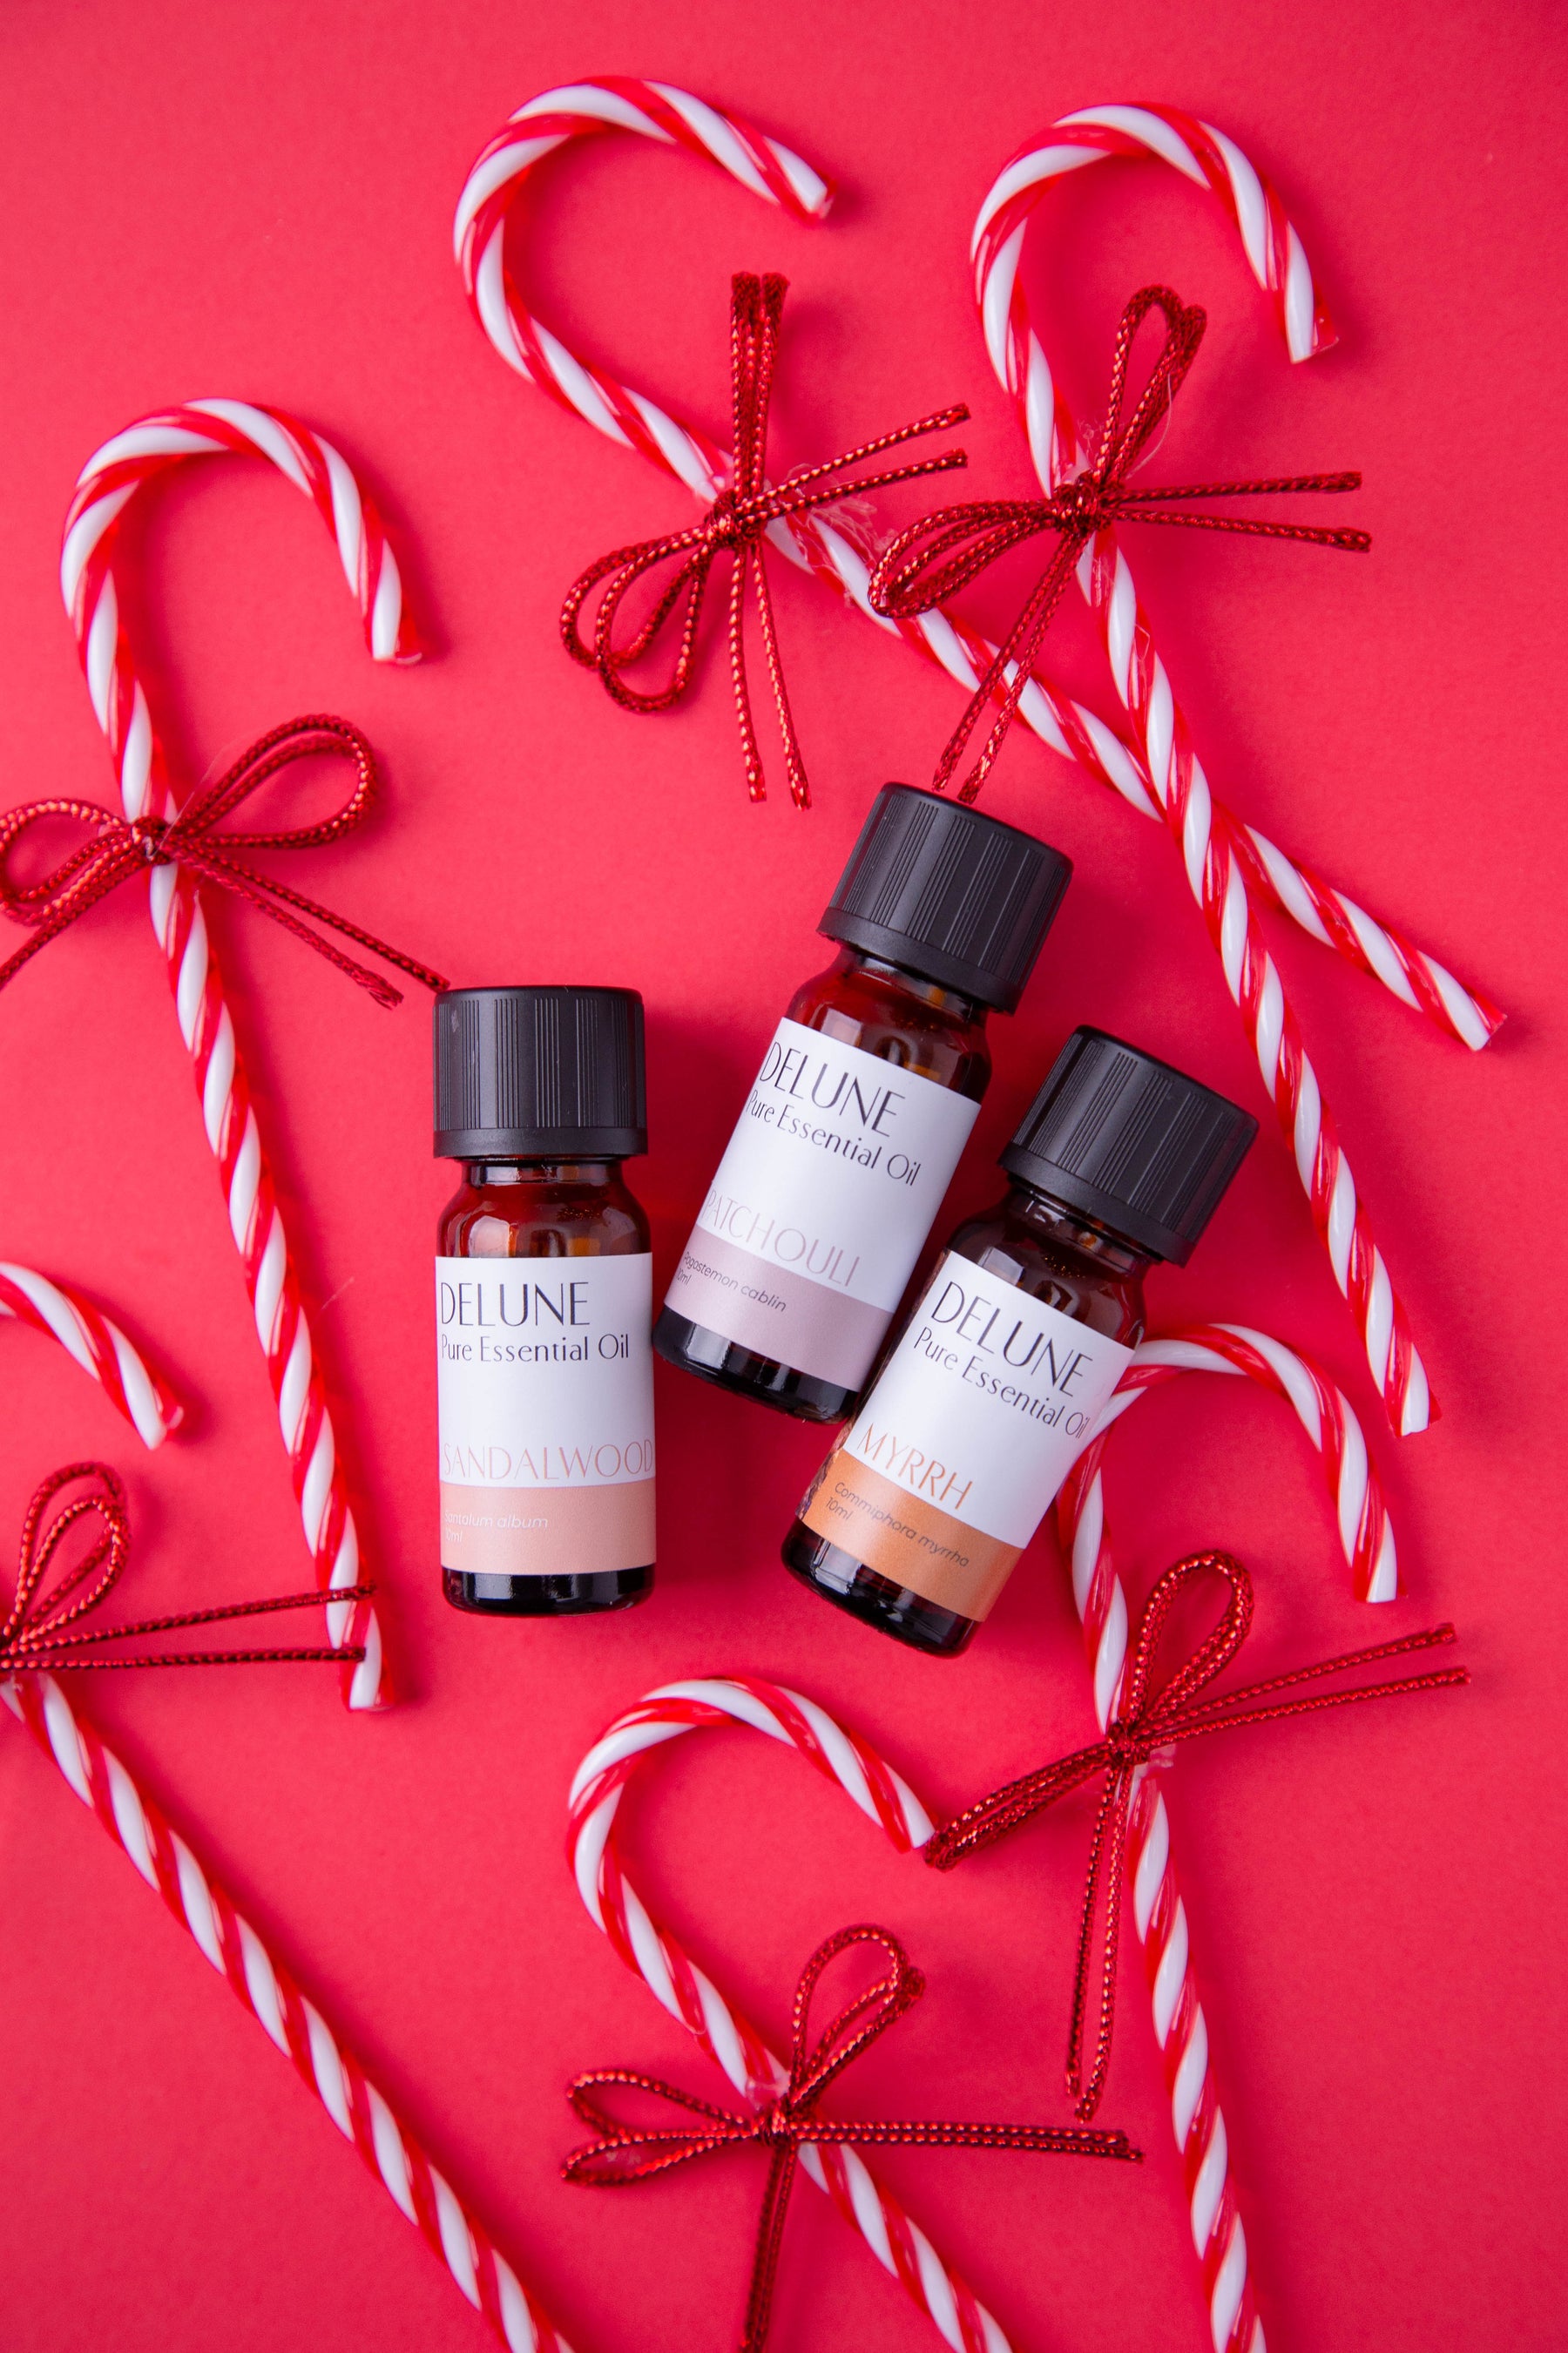 Getting into Christmas with Essential Oils